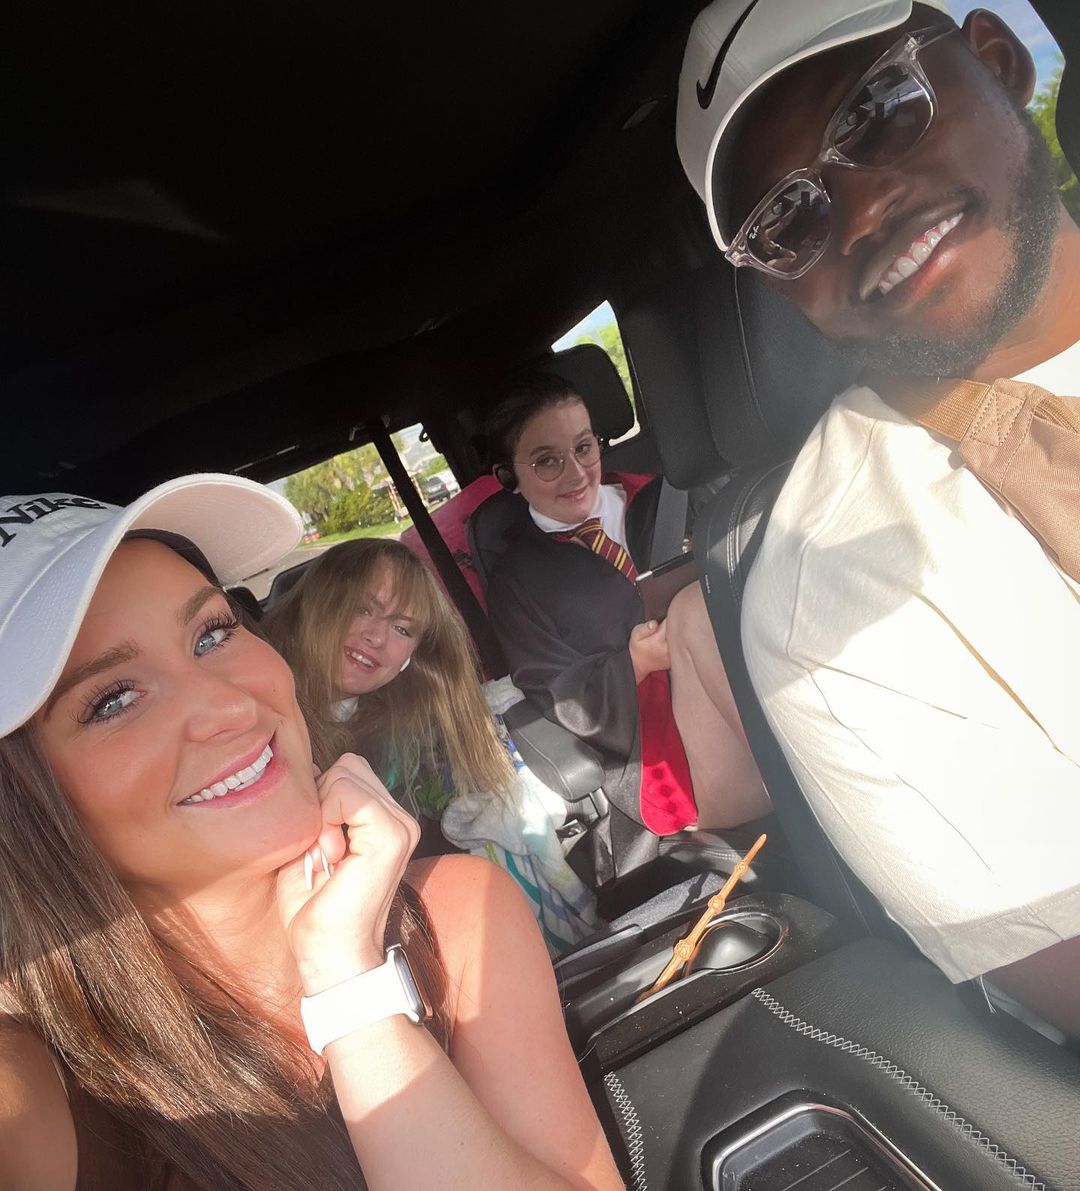 Teen Mom fans praise Leah Messer as she looks ‘amazing’ & ‘happy’ with Jaylan Mobley on 
family vacation in Florida